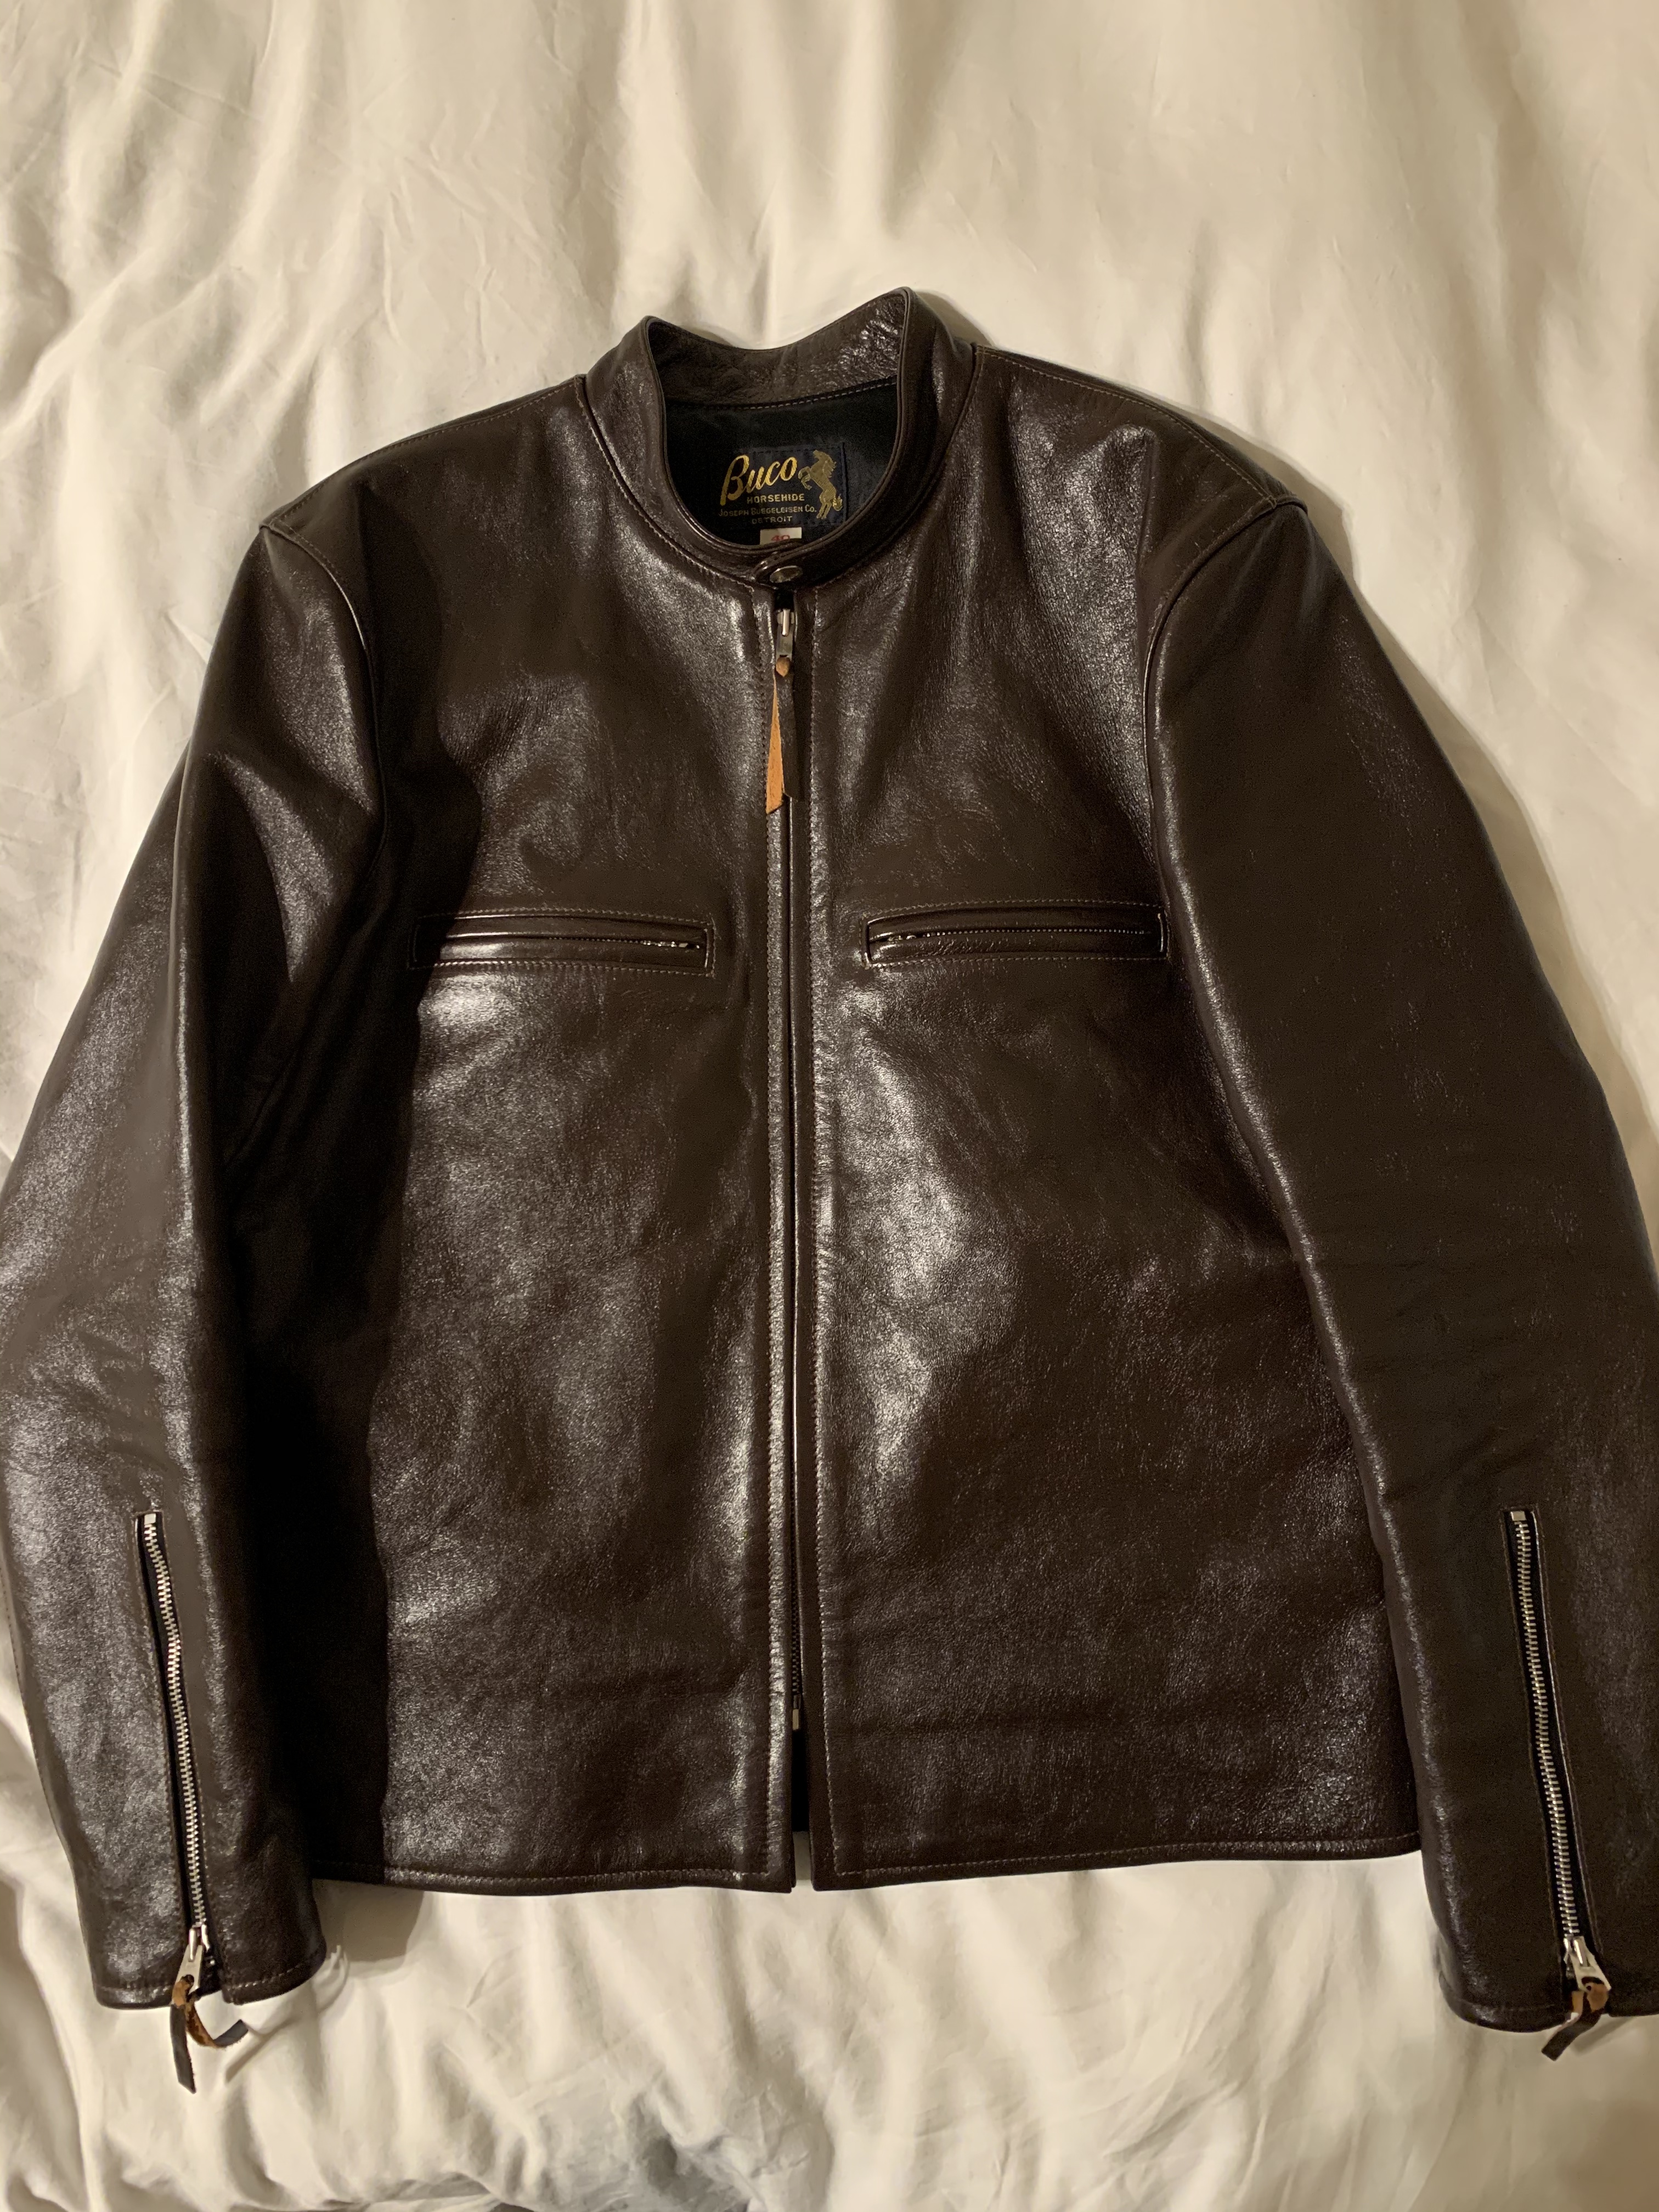 The Real Mccoy's Buco J-100 Black Horsehide Leather Jacket | lupon.gov.ph